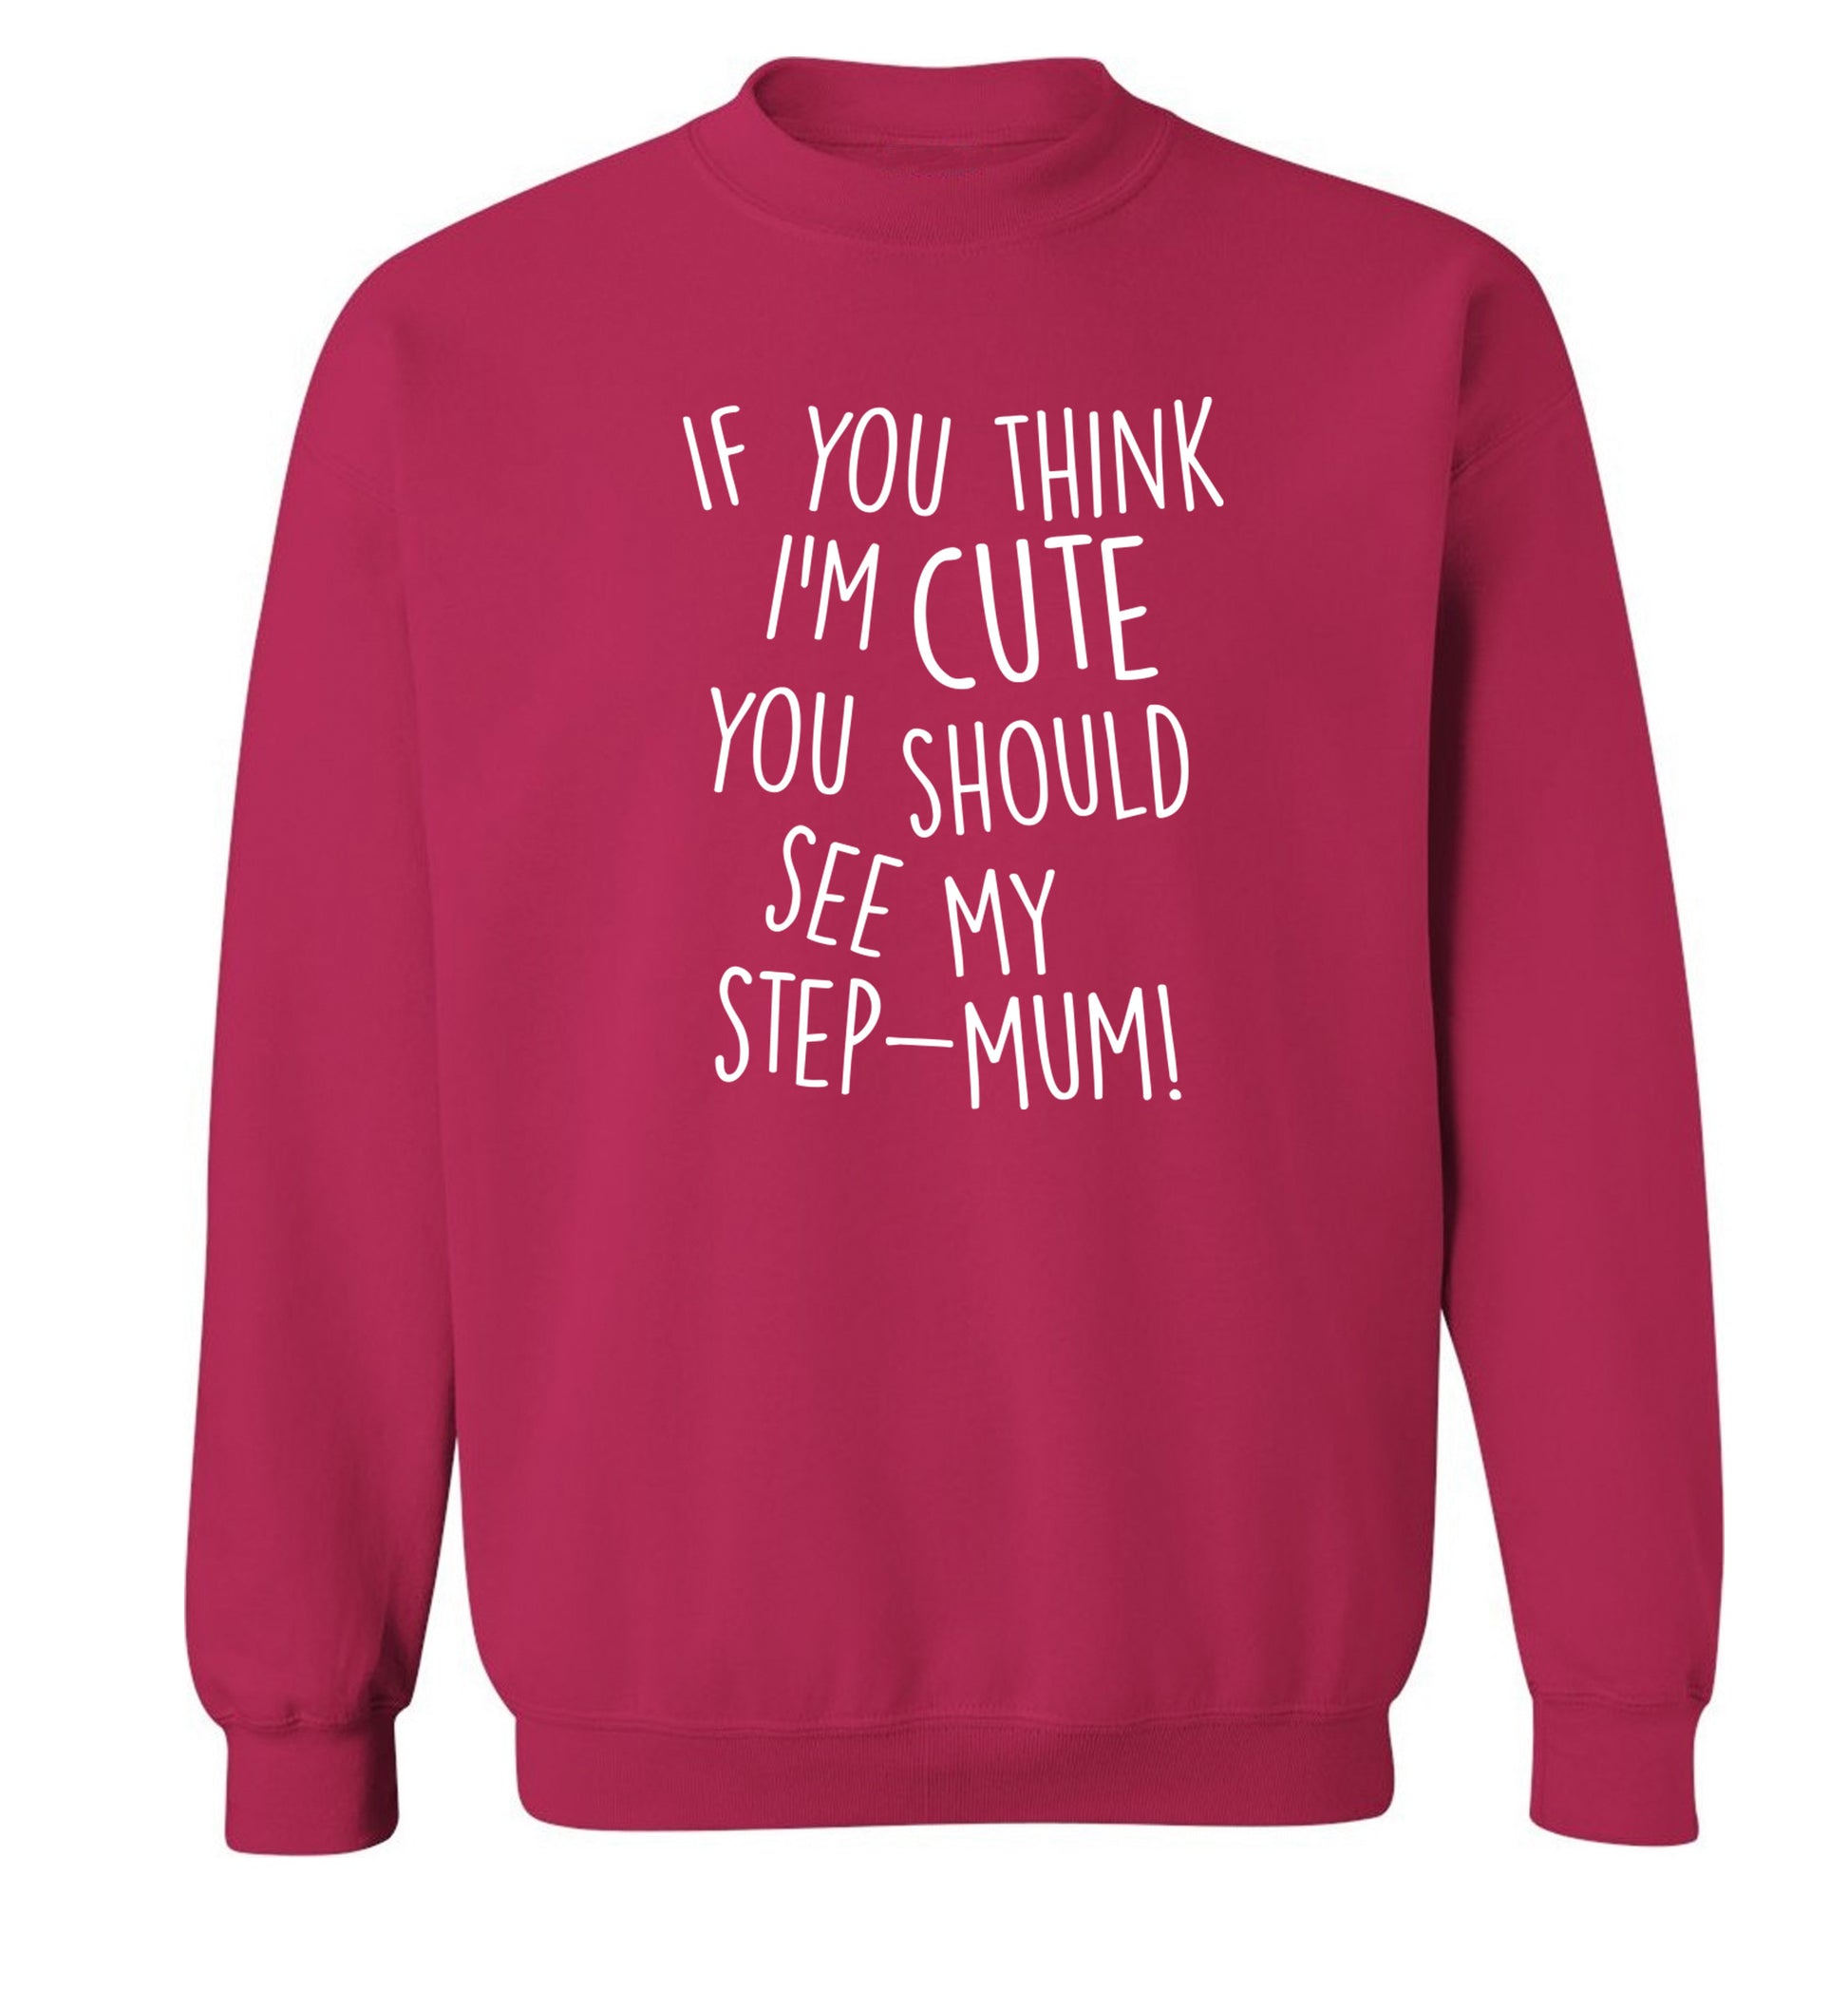 If you think I'm cute you should see my step-mum Adult's unisex pink Sweater 2XL